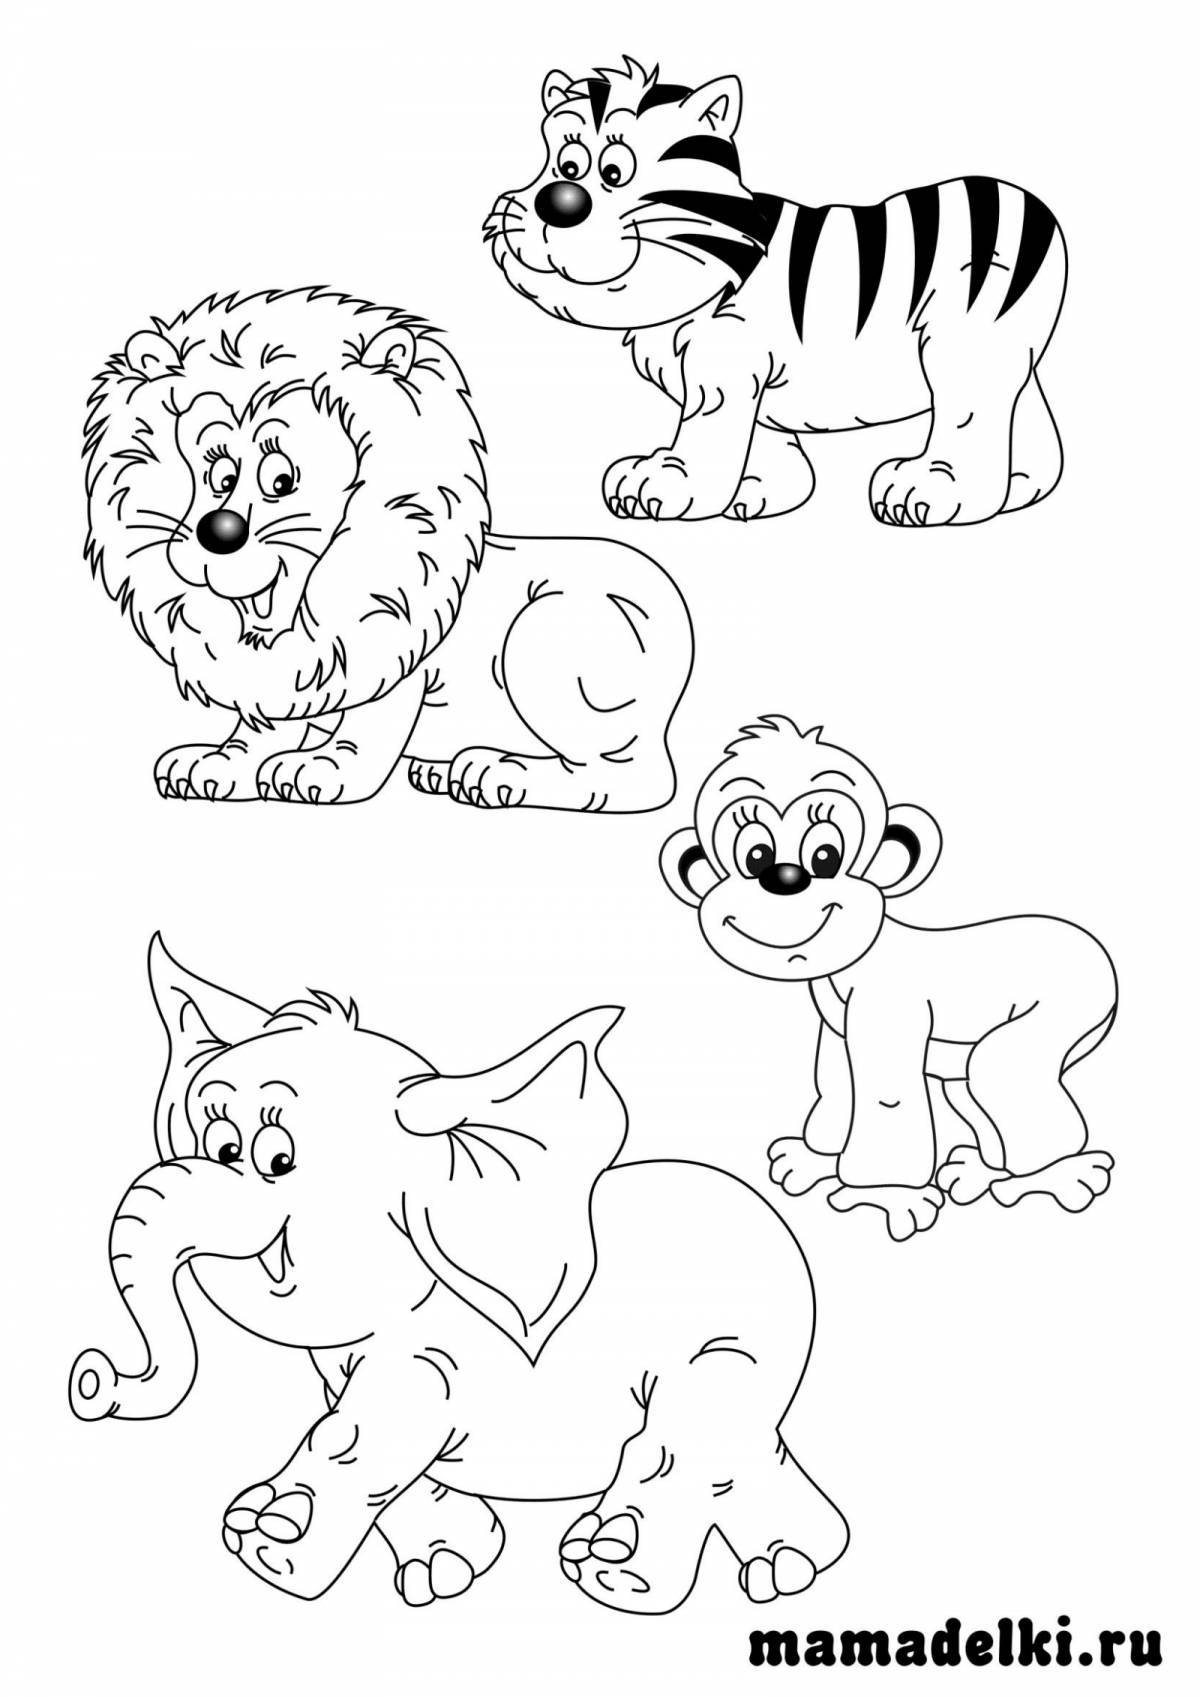 Funny wild animal coloring page